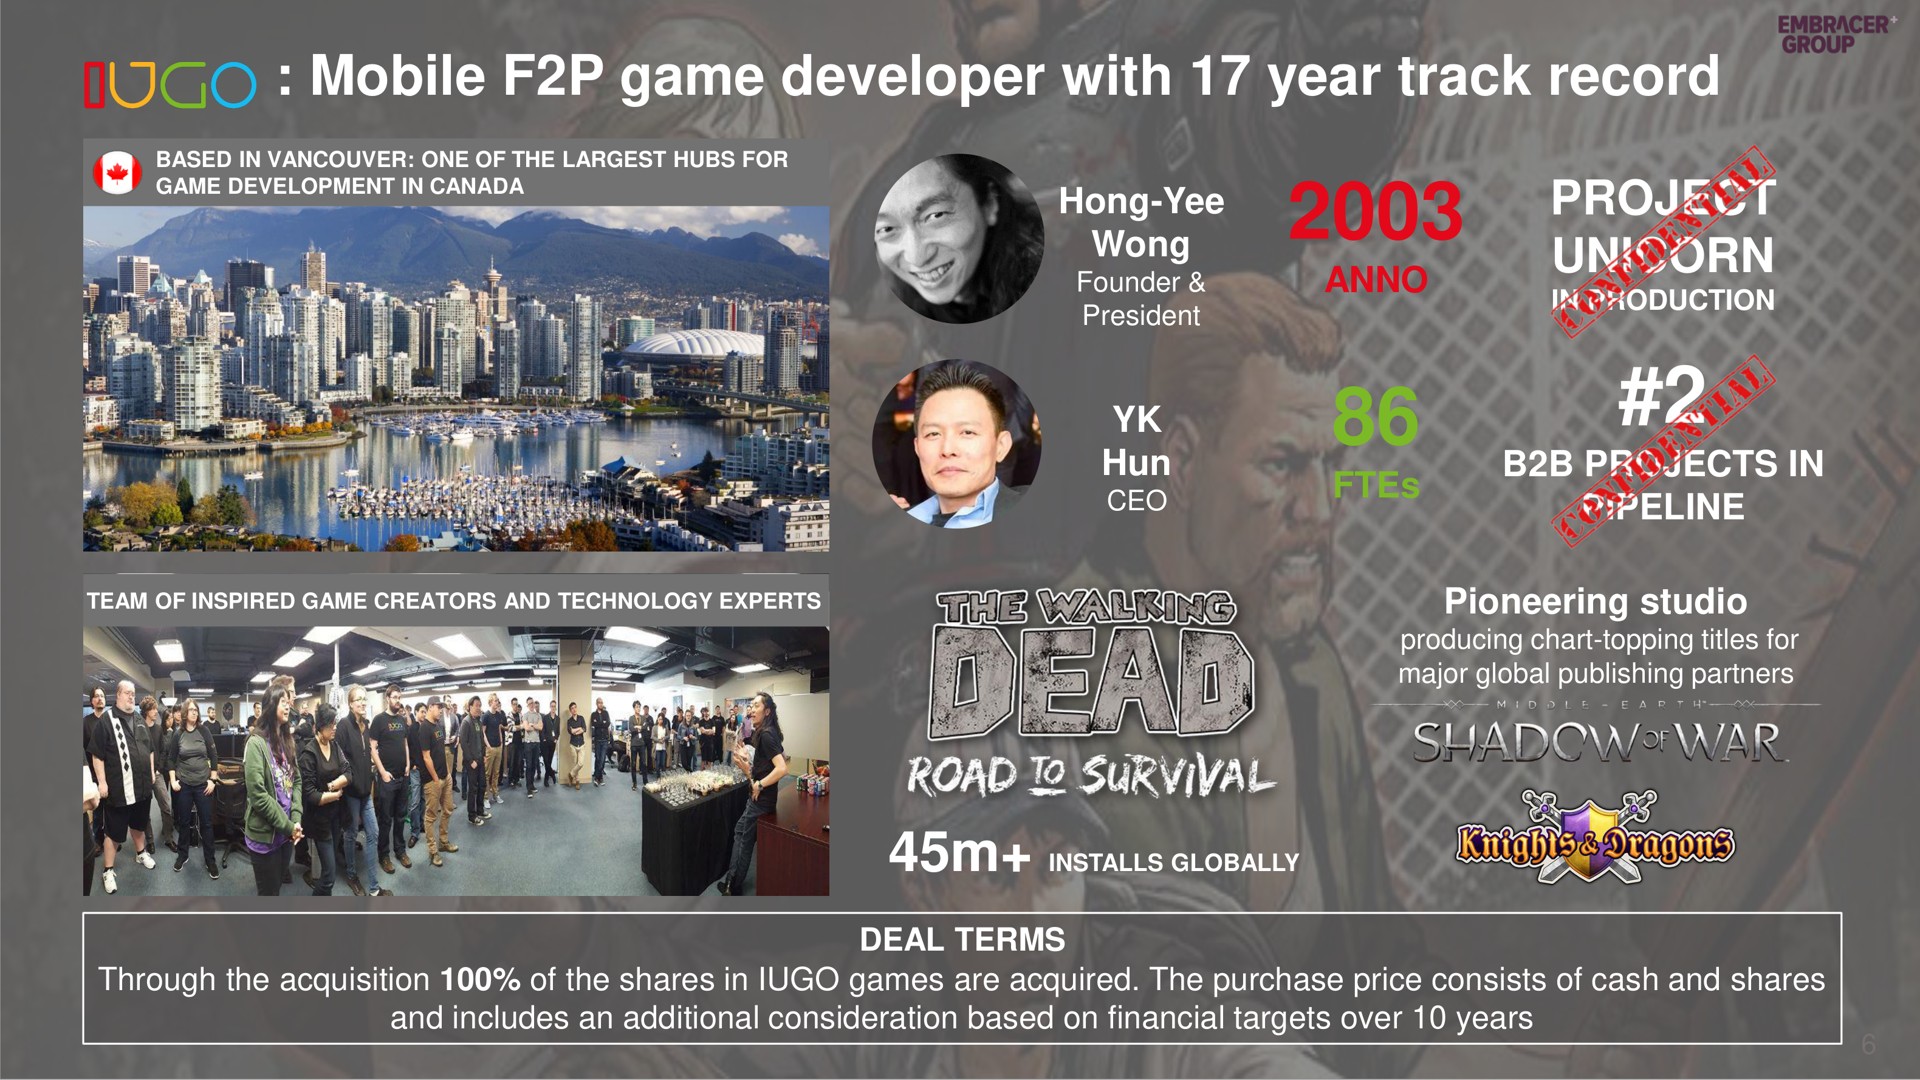 mobile game developer with year track record project unicorn ree | Embracer Group